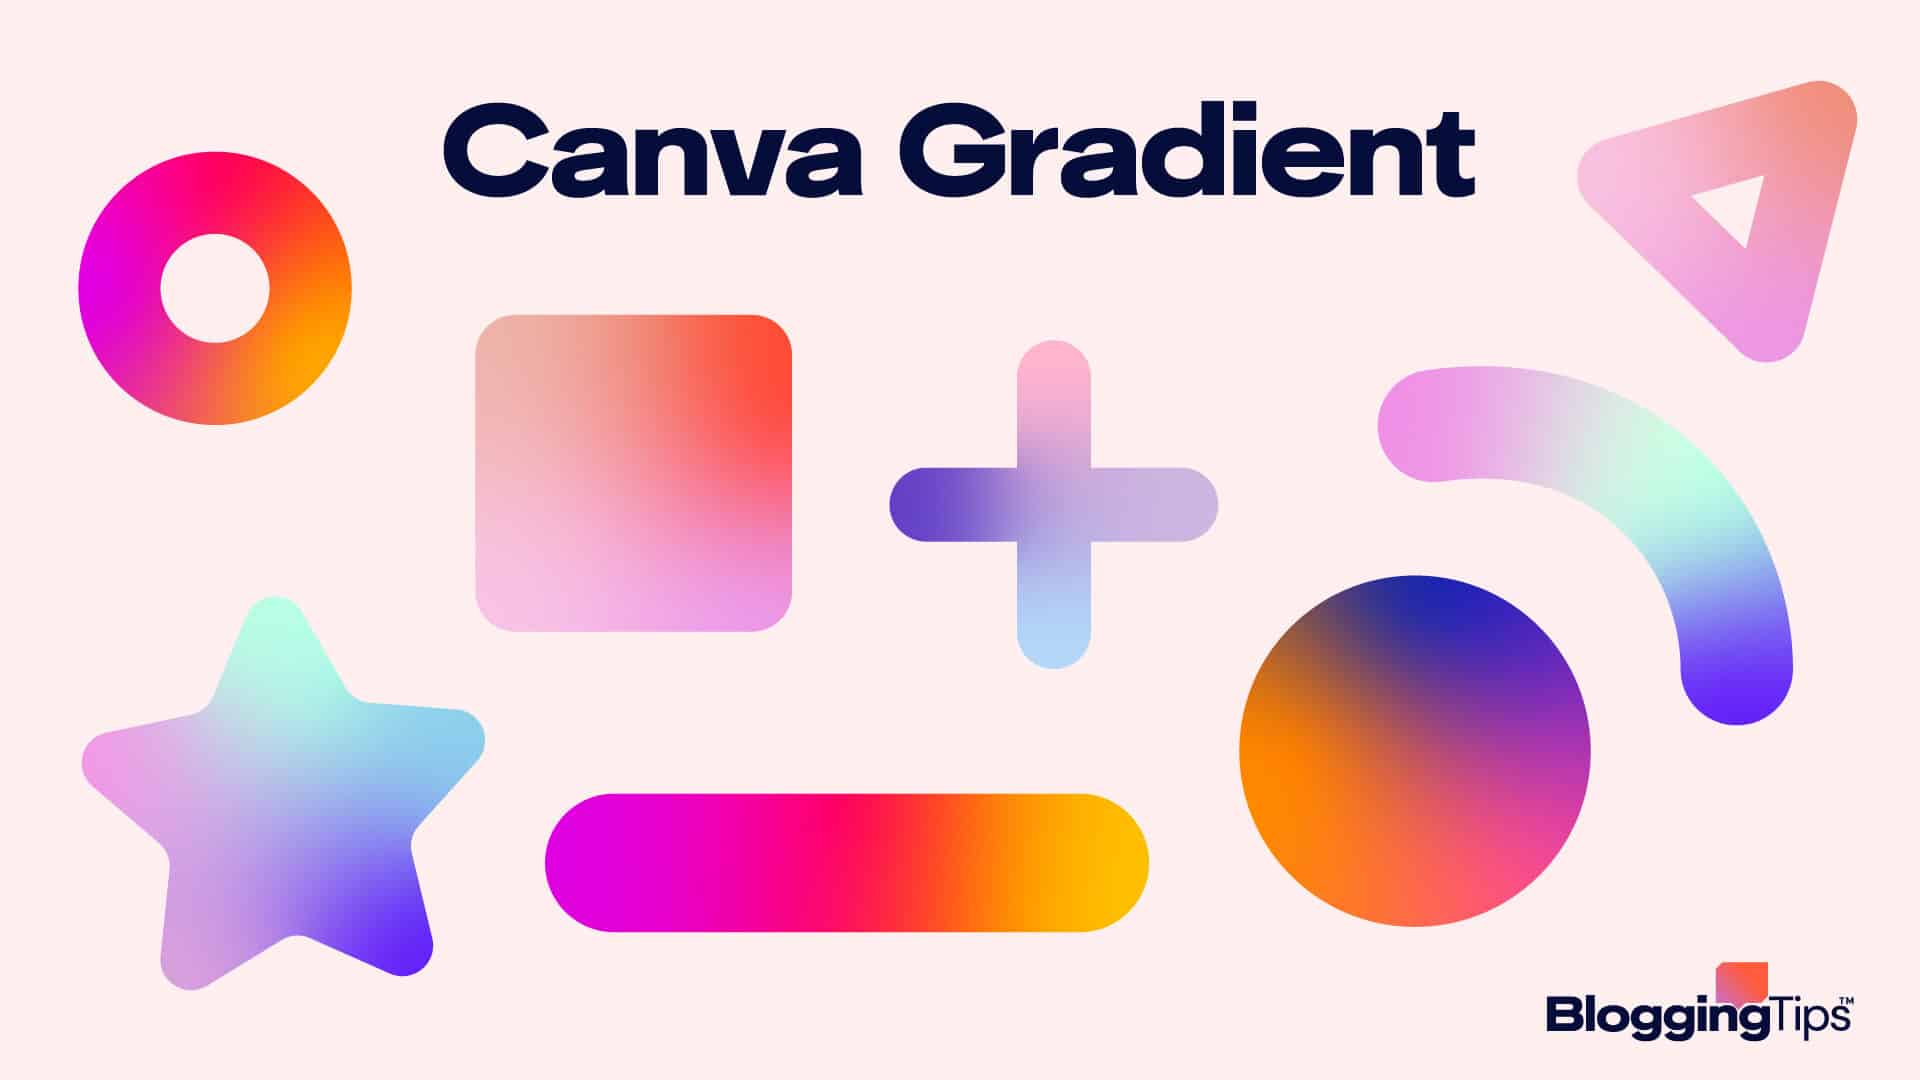 vector graphic showing an illustration of a canva gradient